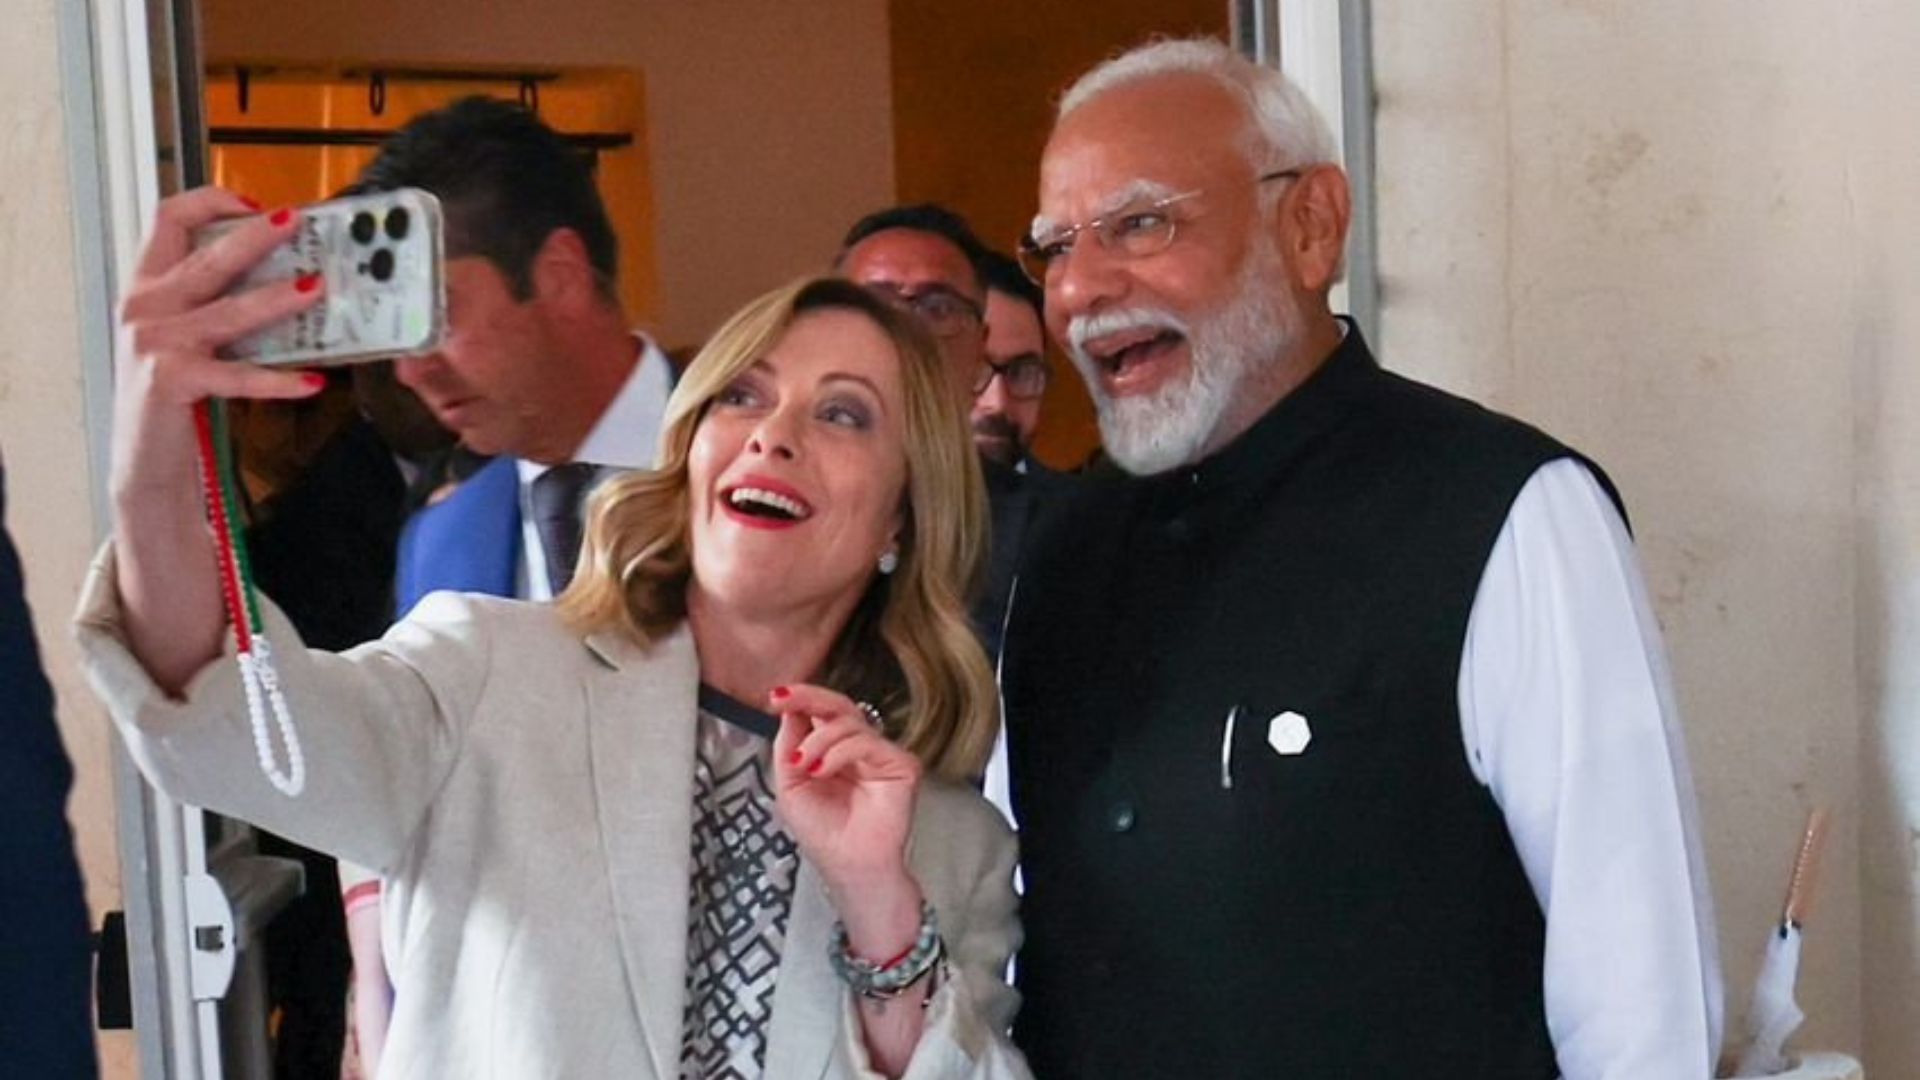 PM Meloni Clicks Selfie With PM Modi At G7 Summit, Showcasing Strong Bilateral Ties